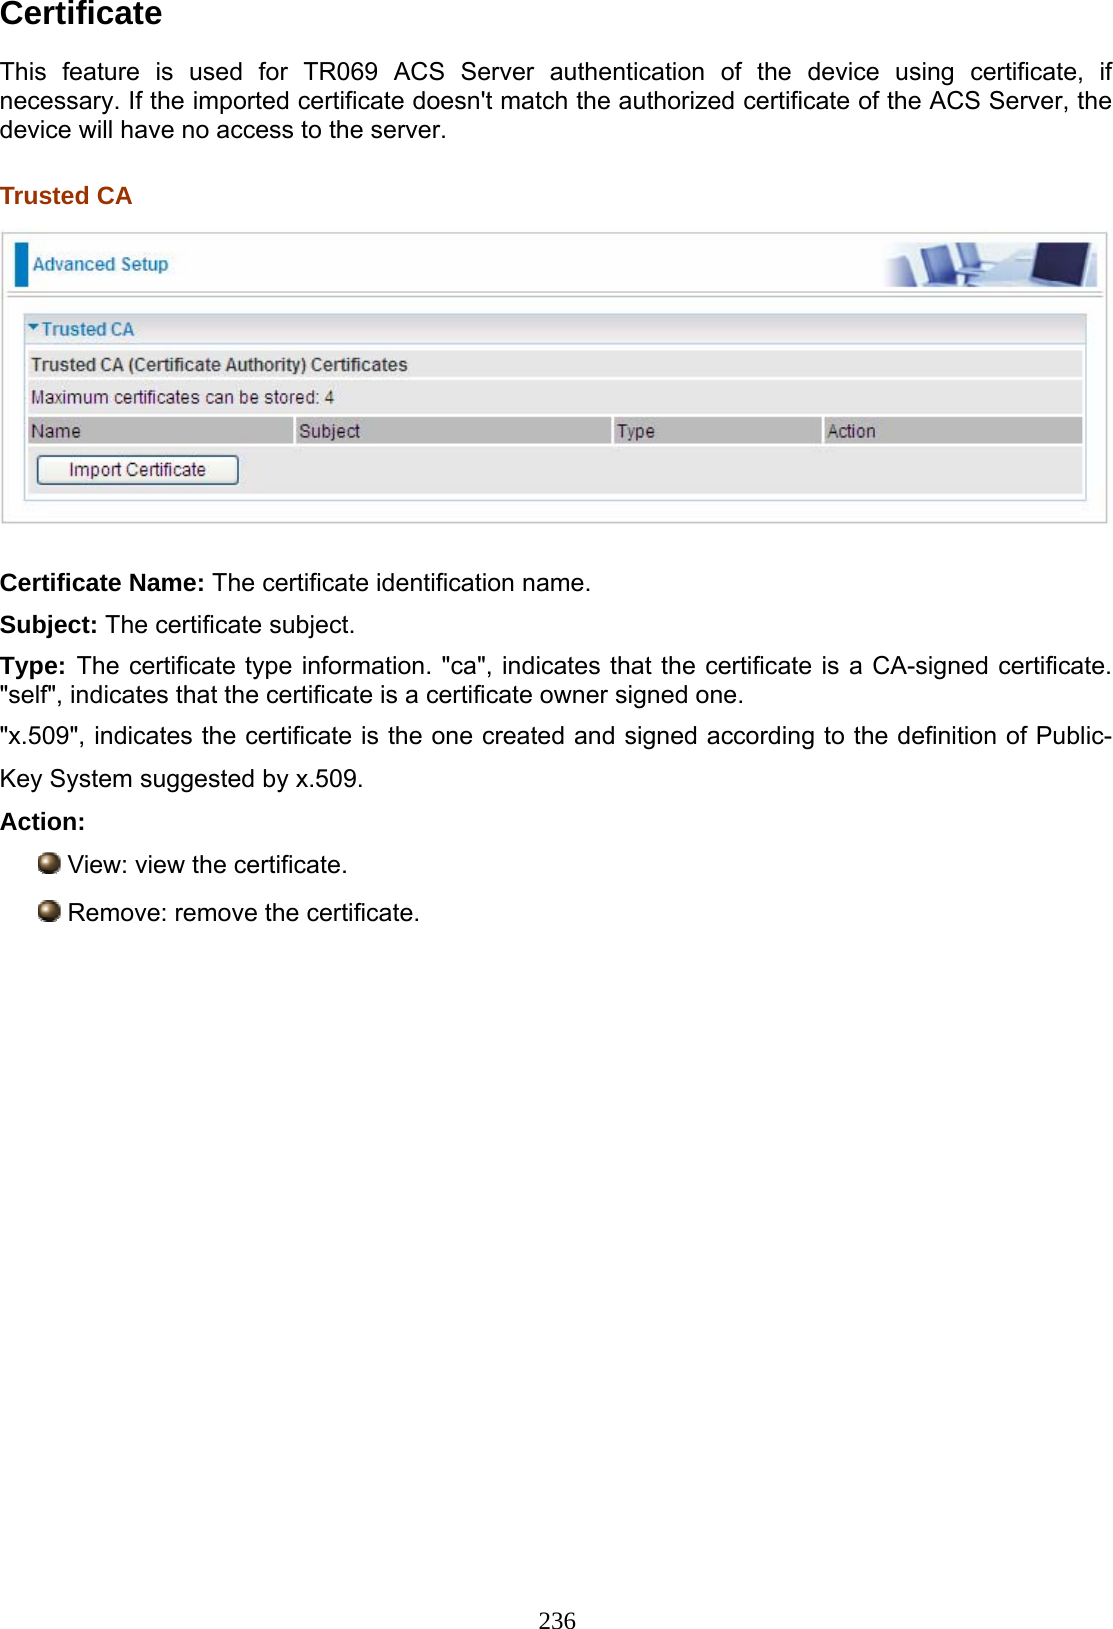 236 Certificate  This feature is used for TR069 ACS Server authentication of the device using certificate, if necessary. If the imported certificate doesn&apos;t match the authorized certificate of the ACS Server, the device will have no access to the server.  Trusted CA   Certificate Name: The certificate identification name. Subject: The certificate subject. Type: The certificate type information. &quot;ca&quot;, indicates that the certificate is a CA-signed certificate. &quot;self&quot;, indicates that the certificate is a certificate owner signed one. &quot;x.509&quot;, indicates the certificate is the one created and signed according to the definition of Public-Key System suggested by x.509. Action:  View: view the certificate.  Remove: remove the certificate.            